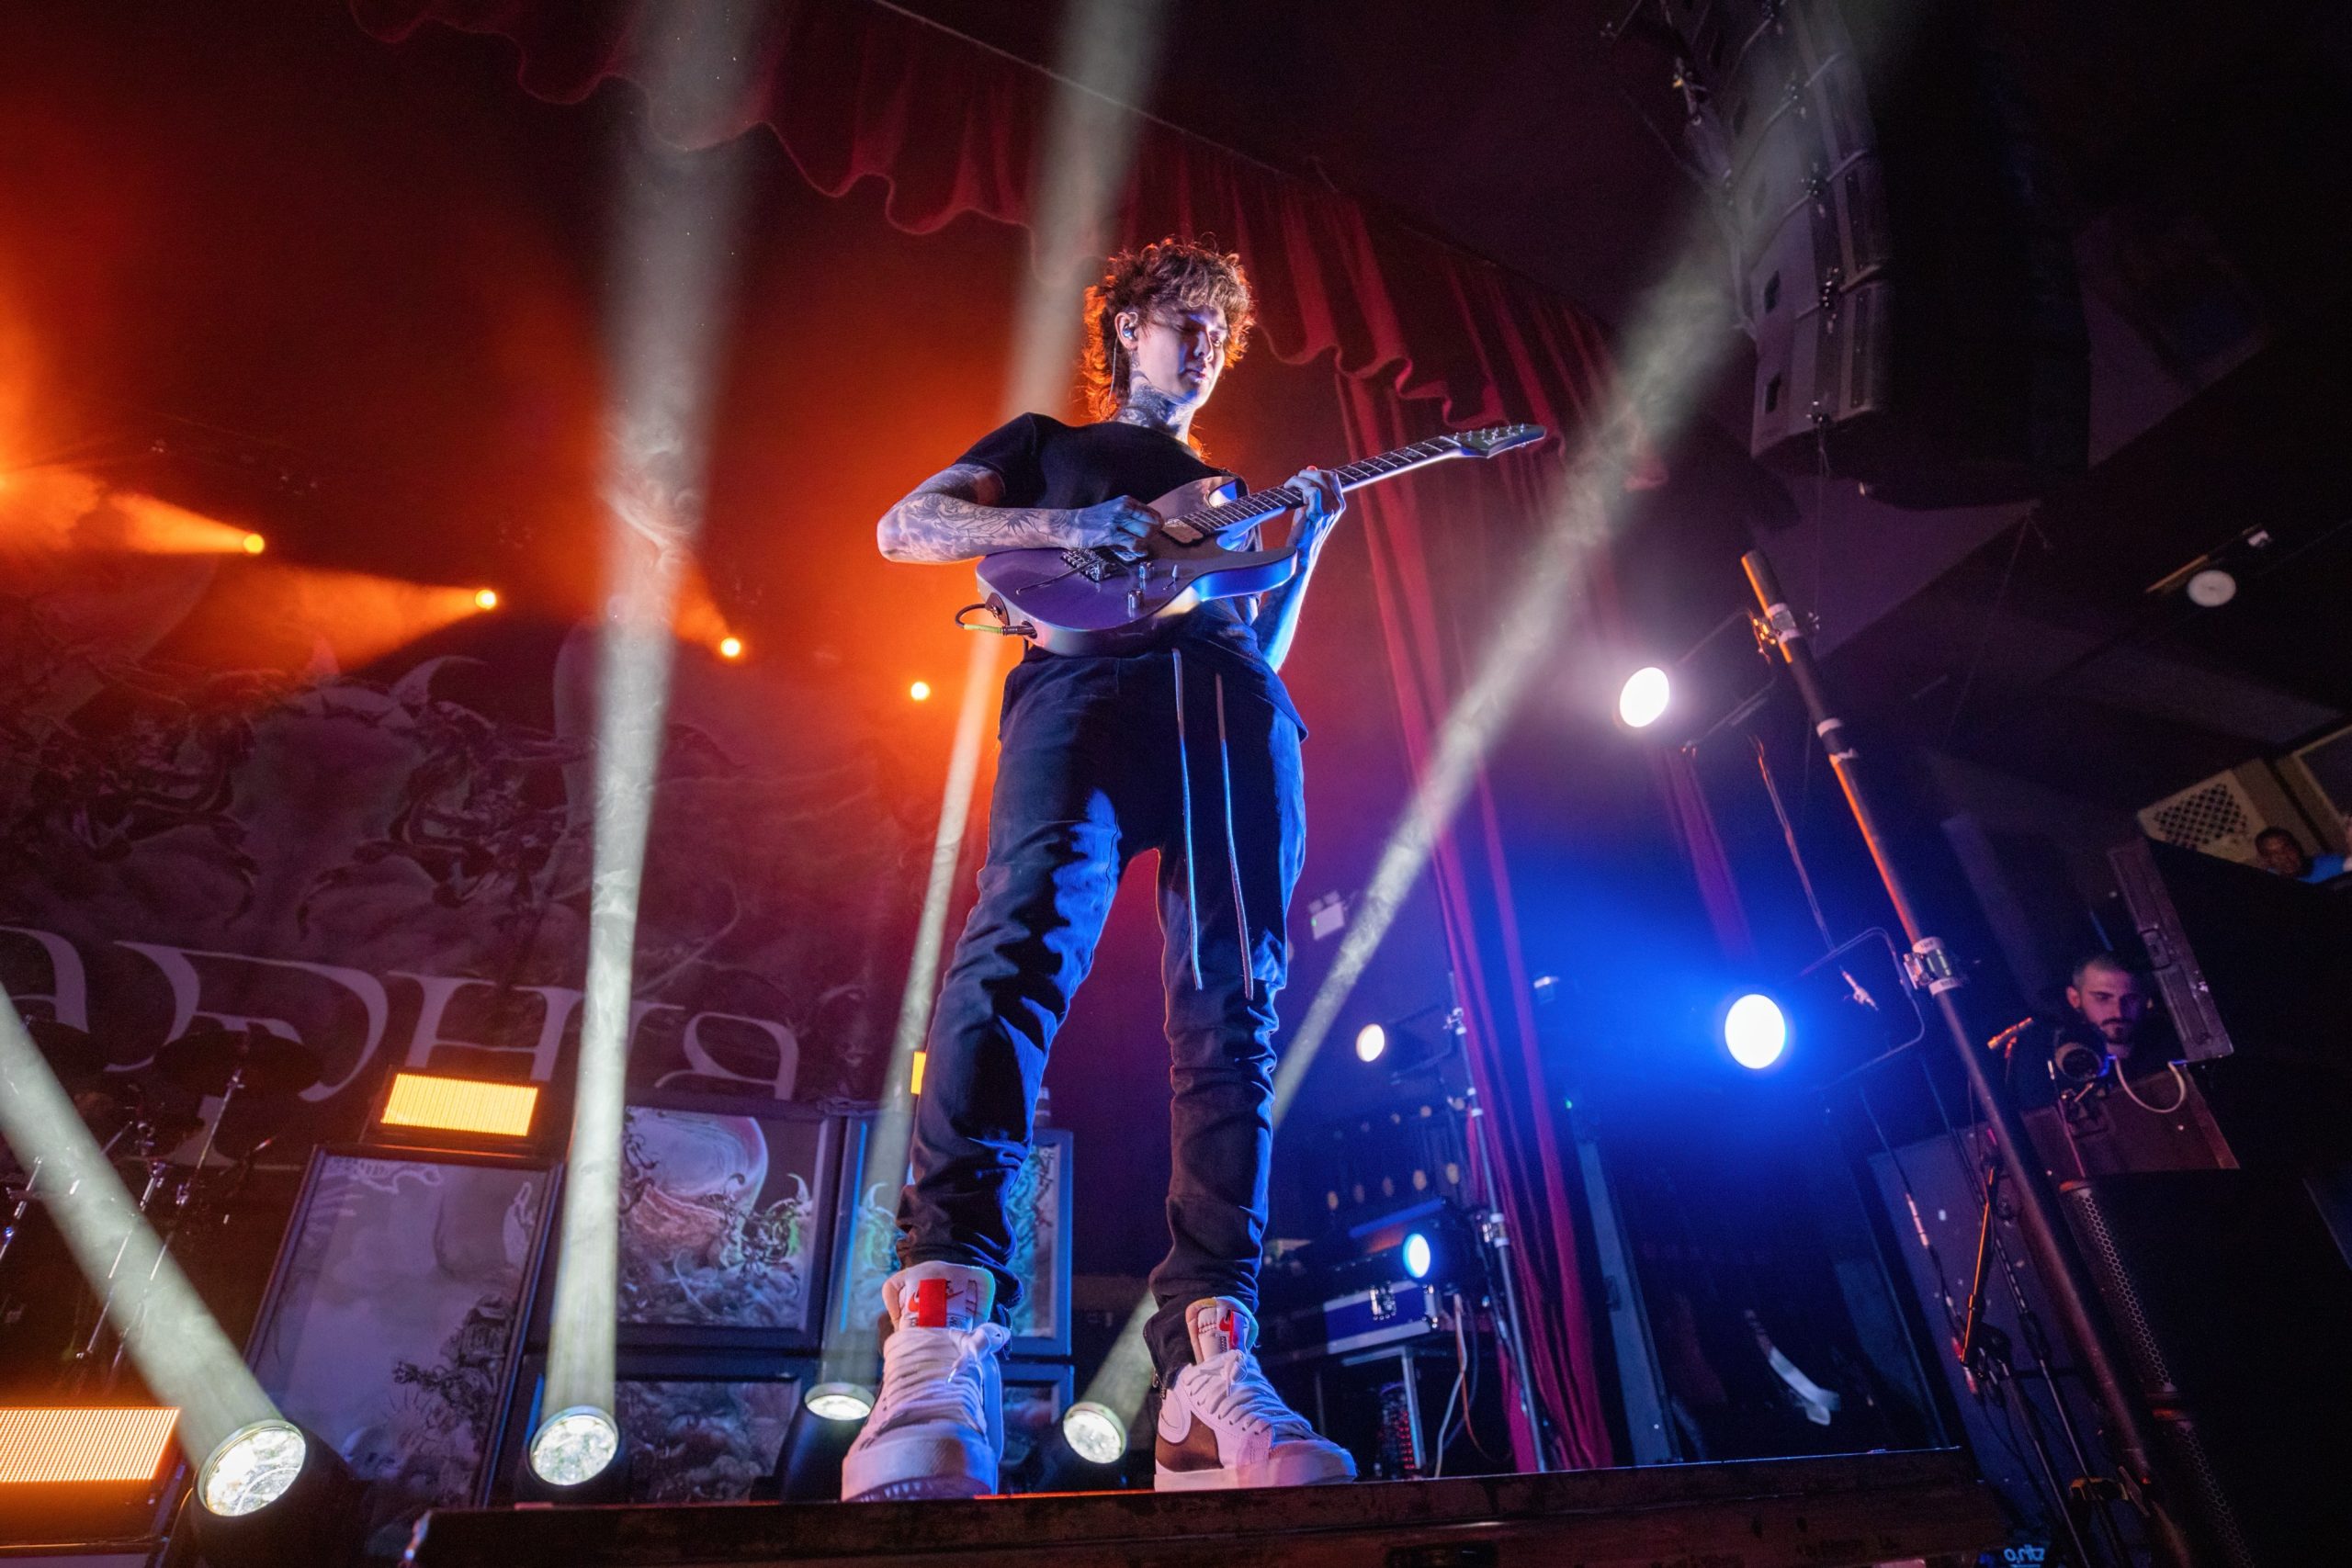 Polyphia inspire Manchester guitarists to give up